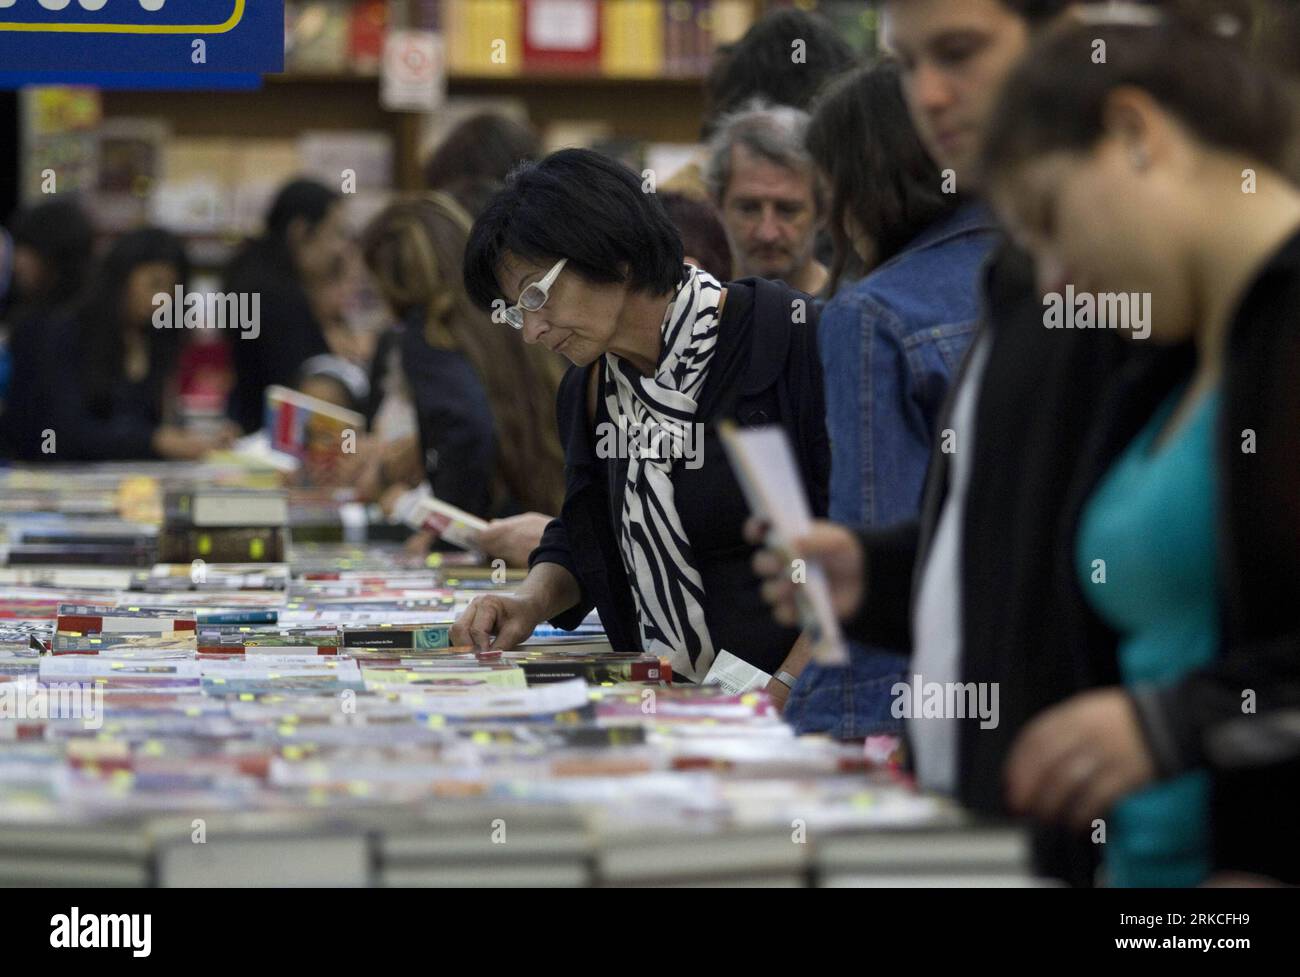 Bildnummer: 54760377  Datum: 18.12.2010  Copyright: imago/Xinhua (101219) -- BUENOS AIRES, Dec. 19, 2010 (Xinhua) -- check out books at the Bookstores Night event, in Buenos Aires, Argentina, on Dec. 18, 2010. During the event, bookstores open until late night and books are on sale to promote the habit of reading among citizens. The United Nations Educational, Scientific and Cultural Organization (UNESCO) has designated Buenos Aires as the World Book Capital 2011 . (Xinhua/Martin Zabala)(axy) ARGENTINA-BUENOS AIRES-BOOKSTORES NIGHT PUBLICATIONxNOTxINxCHN Gesellschaft nachts Buch Buchhandlung k Stock Photo